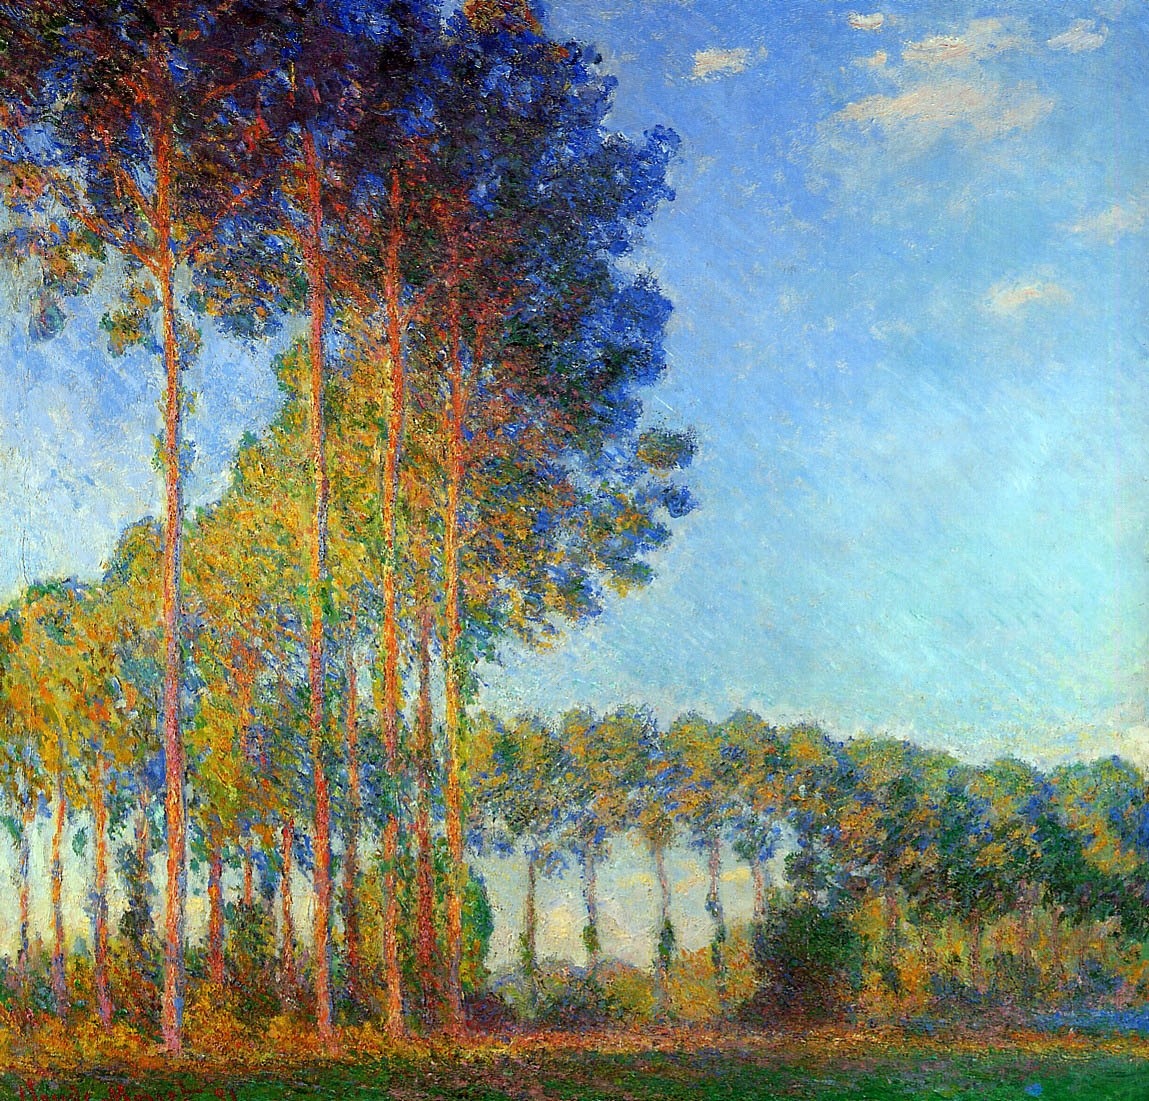 eat-art-at8:
“ Poplars on the Banks of the River Epte, Seen from the Marsh
Claude Monet, 1892
”